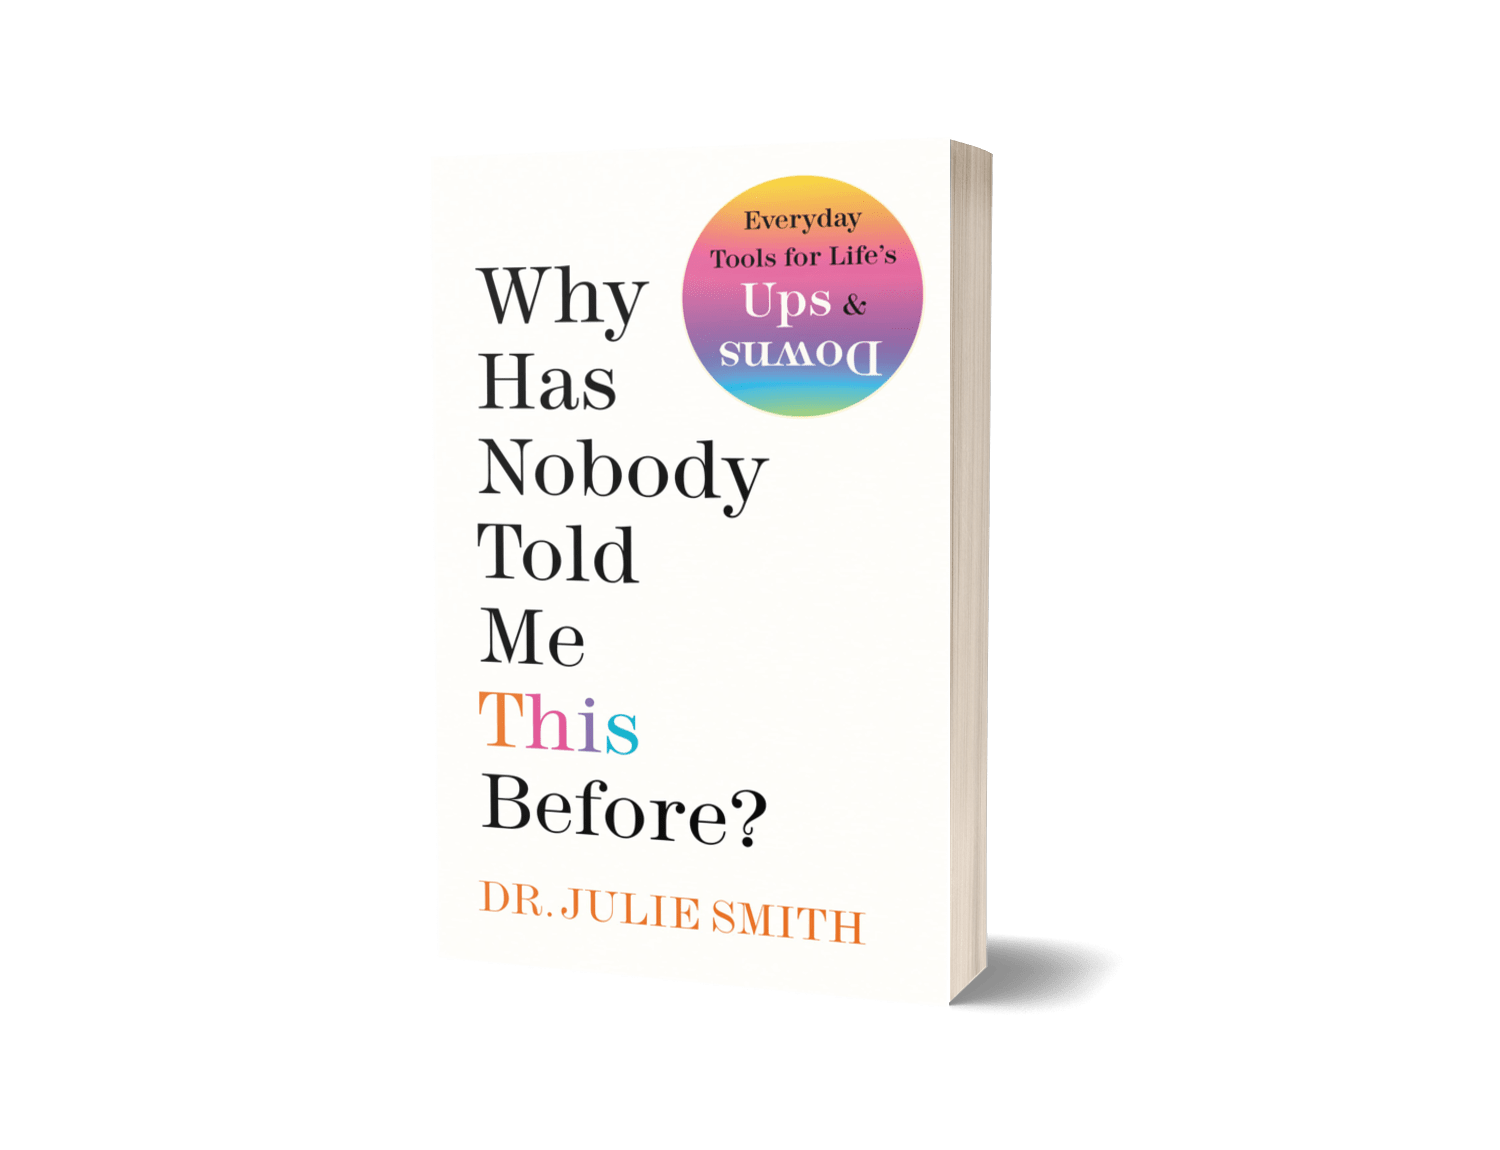 Why has Nobody Told me this Before? by Dr. Julie Smith